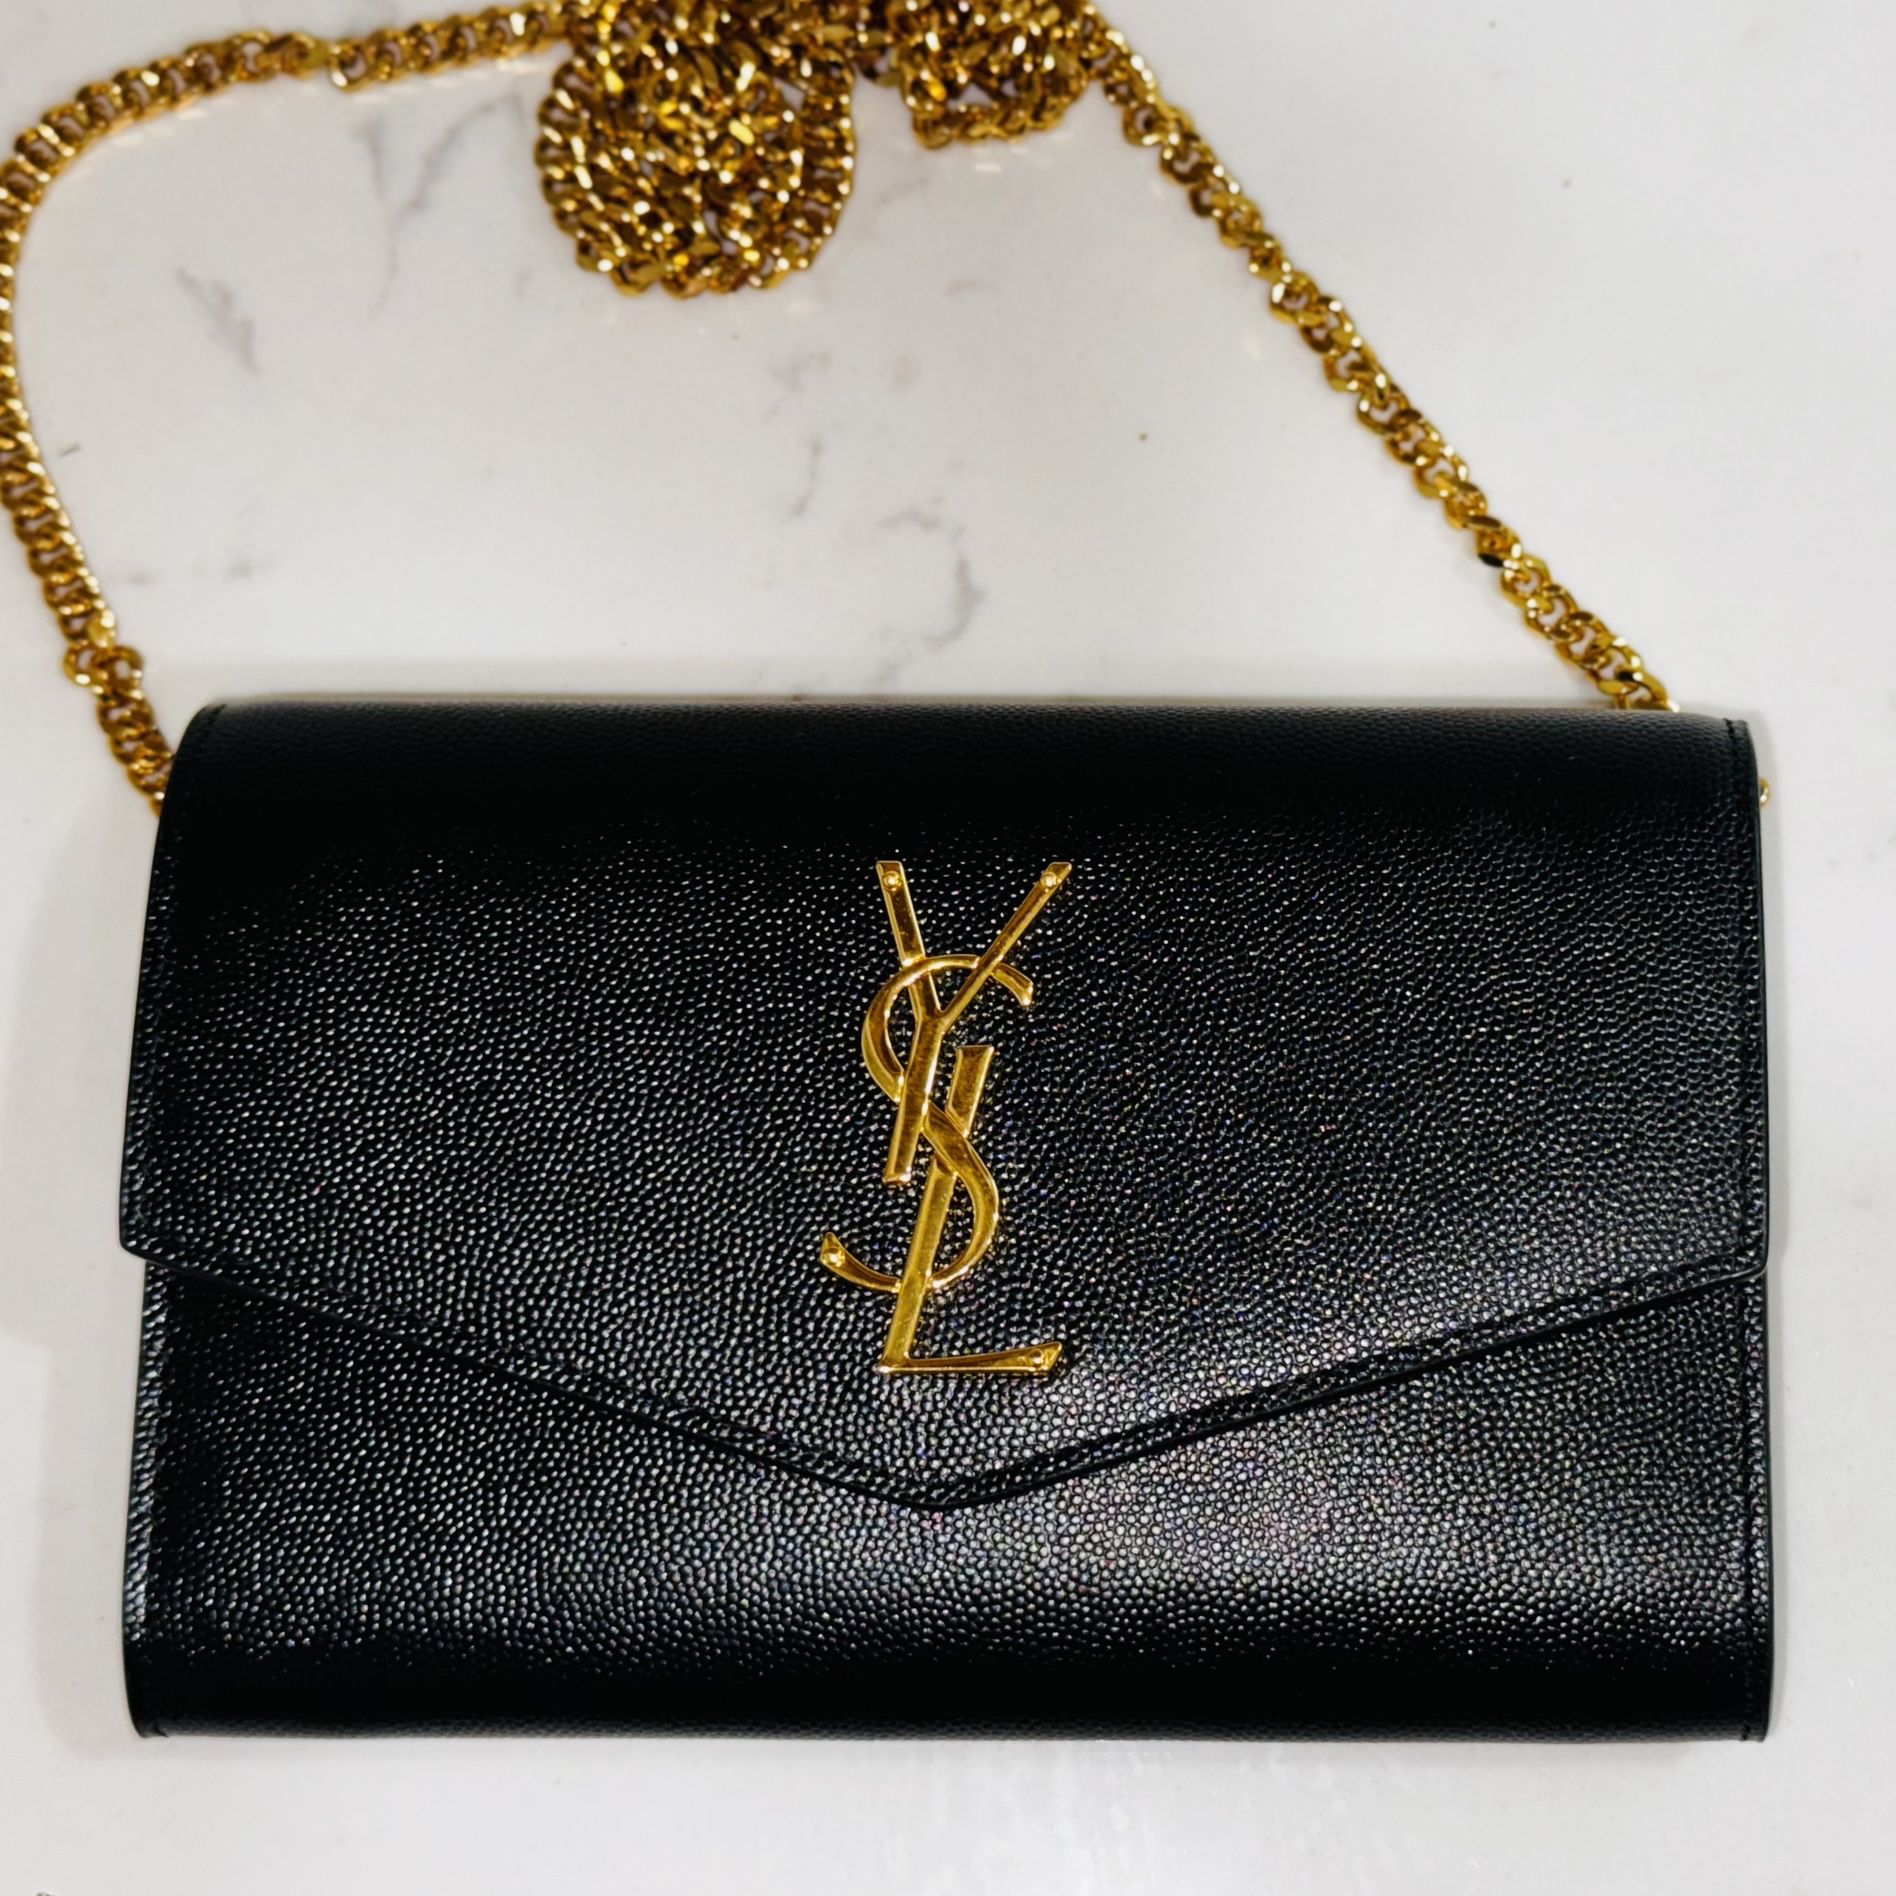 Ysl Bag And Wallet 